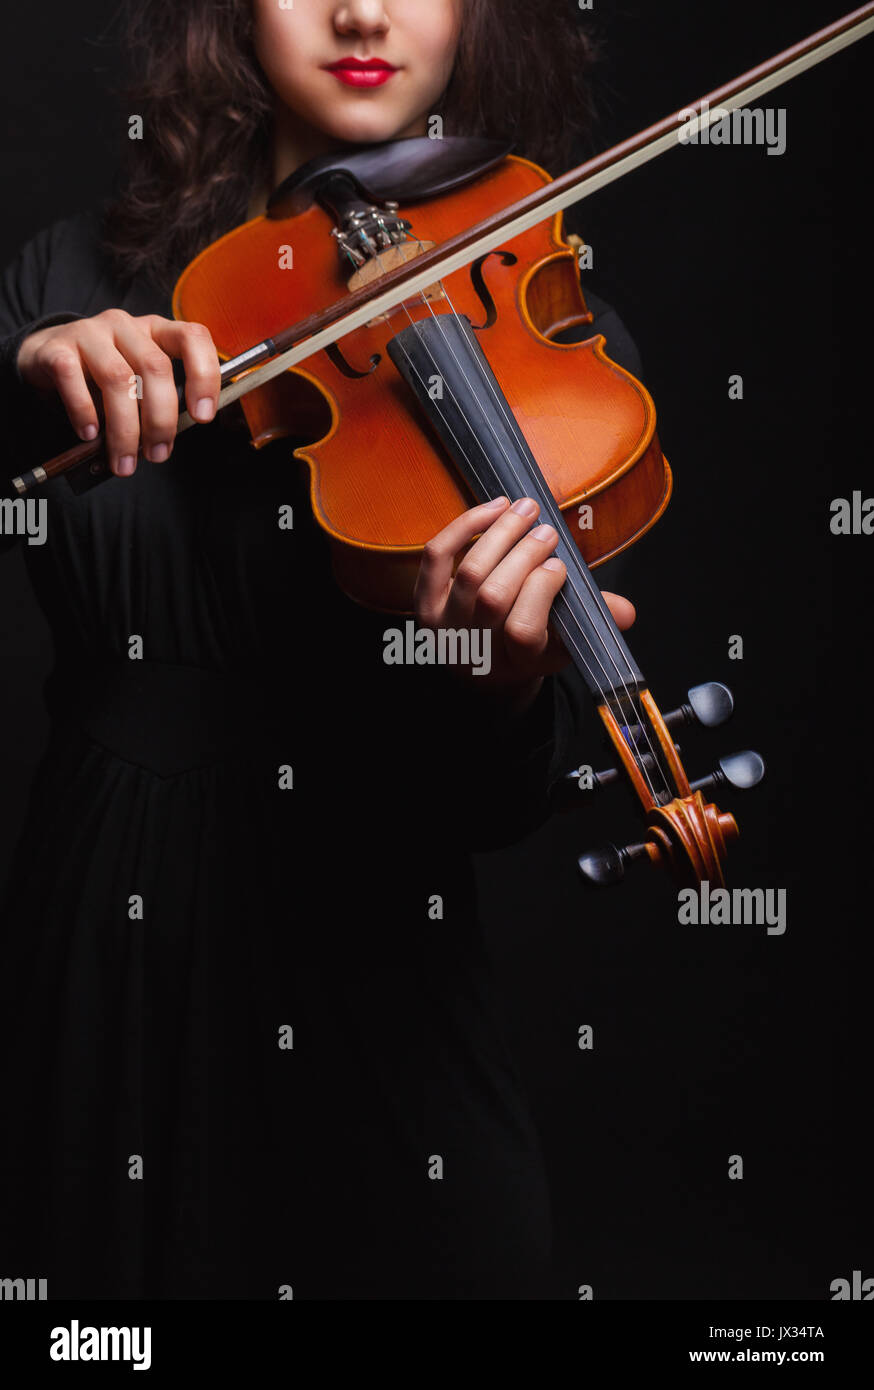 Musical concept. A woman is playing the violin. Focus on the violin Stock Photo